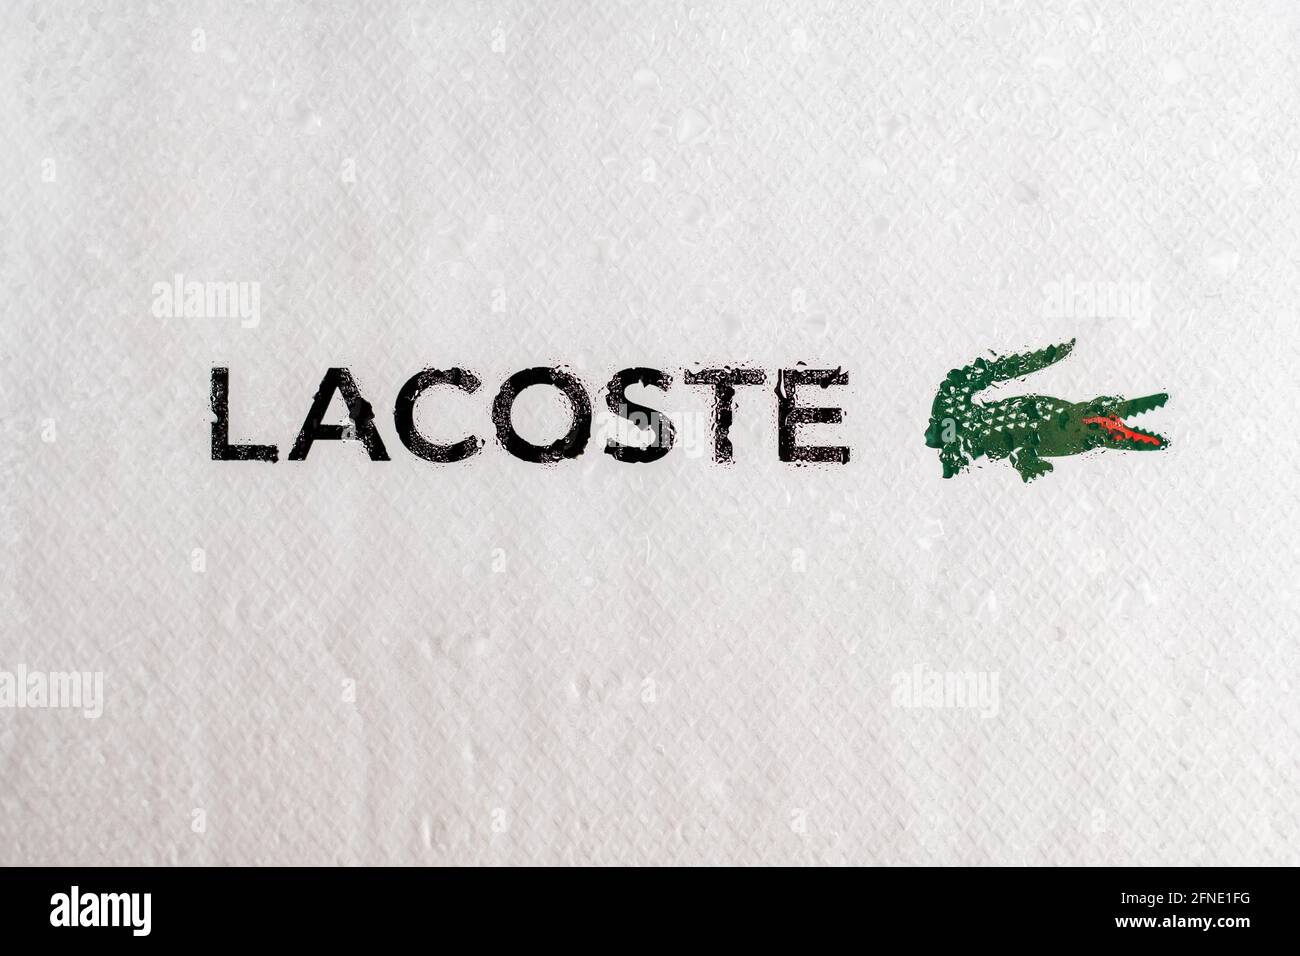 Minsk, Belarus 07.05.2021: Lacoste logo and name behind glass, on white background with water drops. Stock Photo